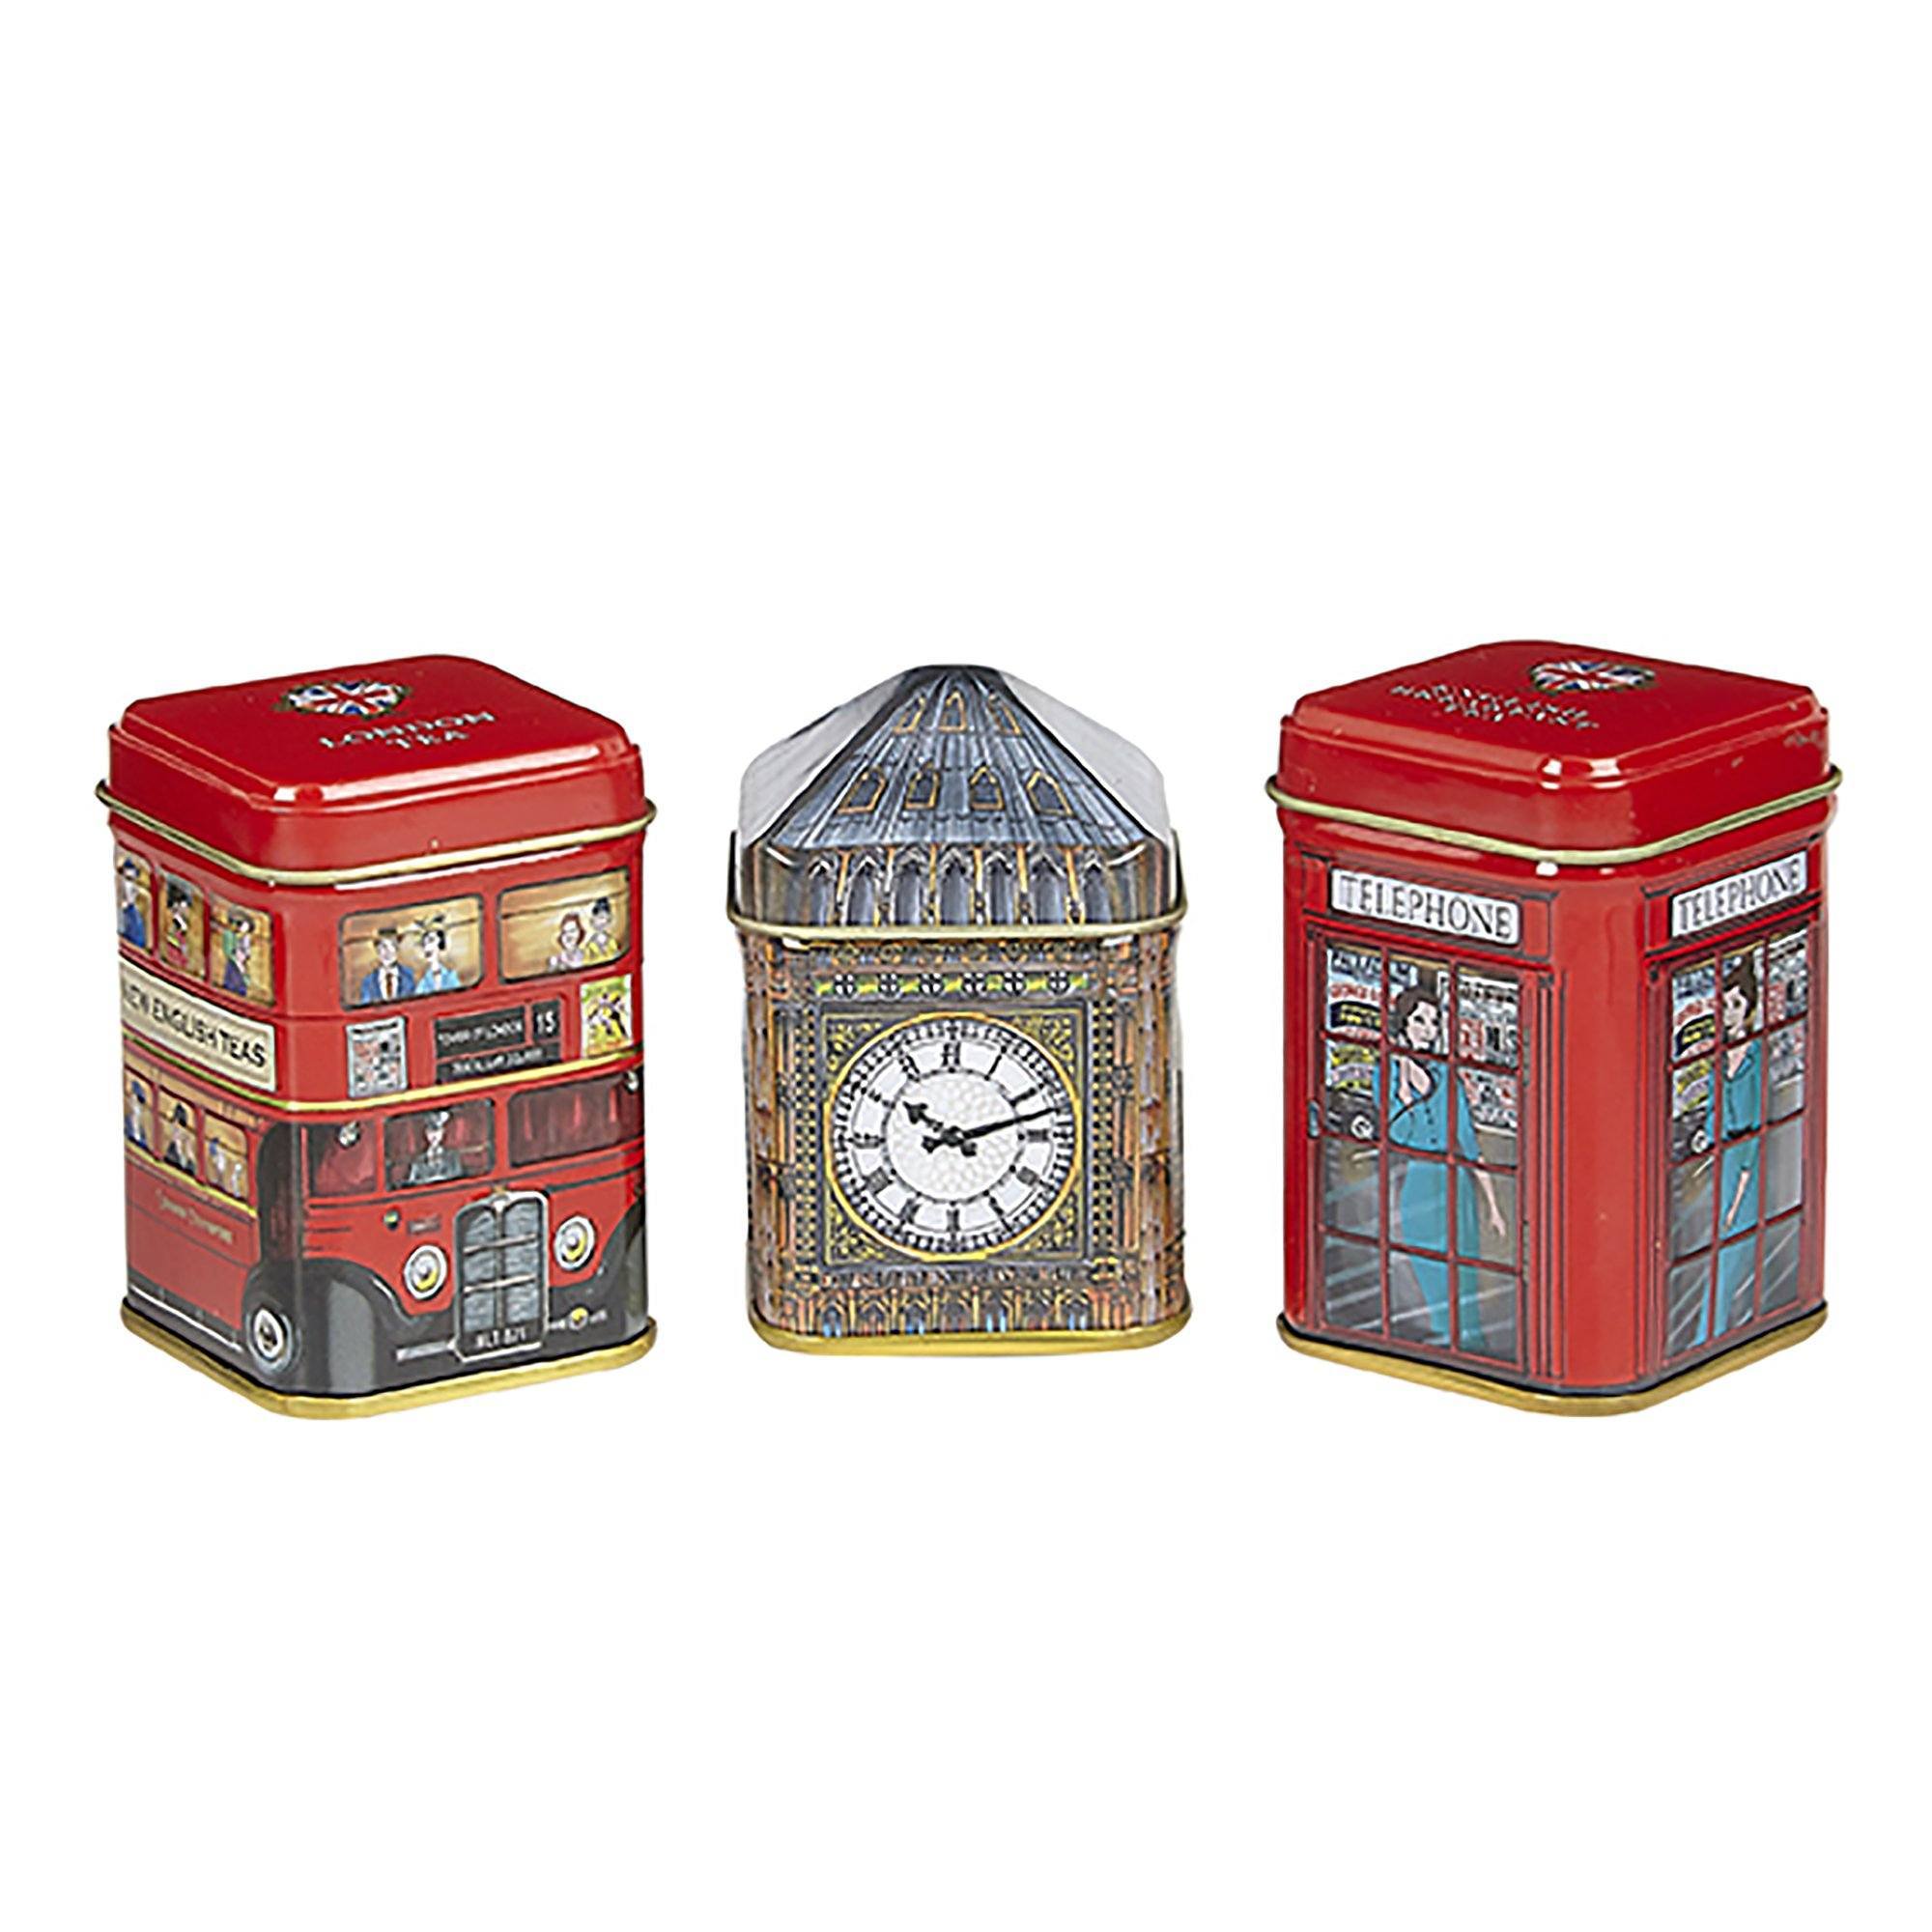 Traditions of London Tea Collection tins